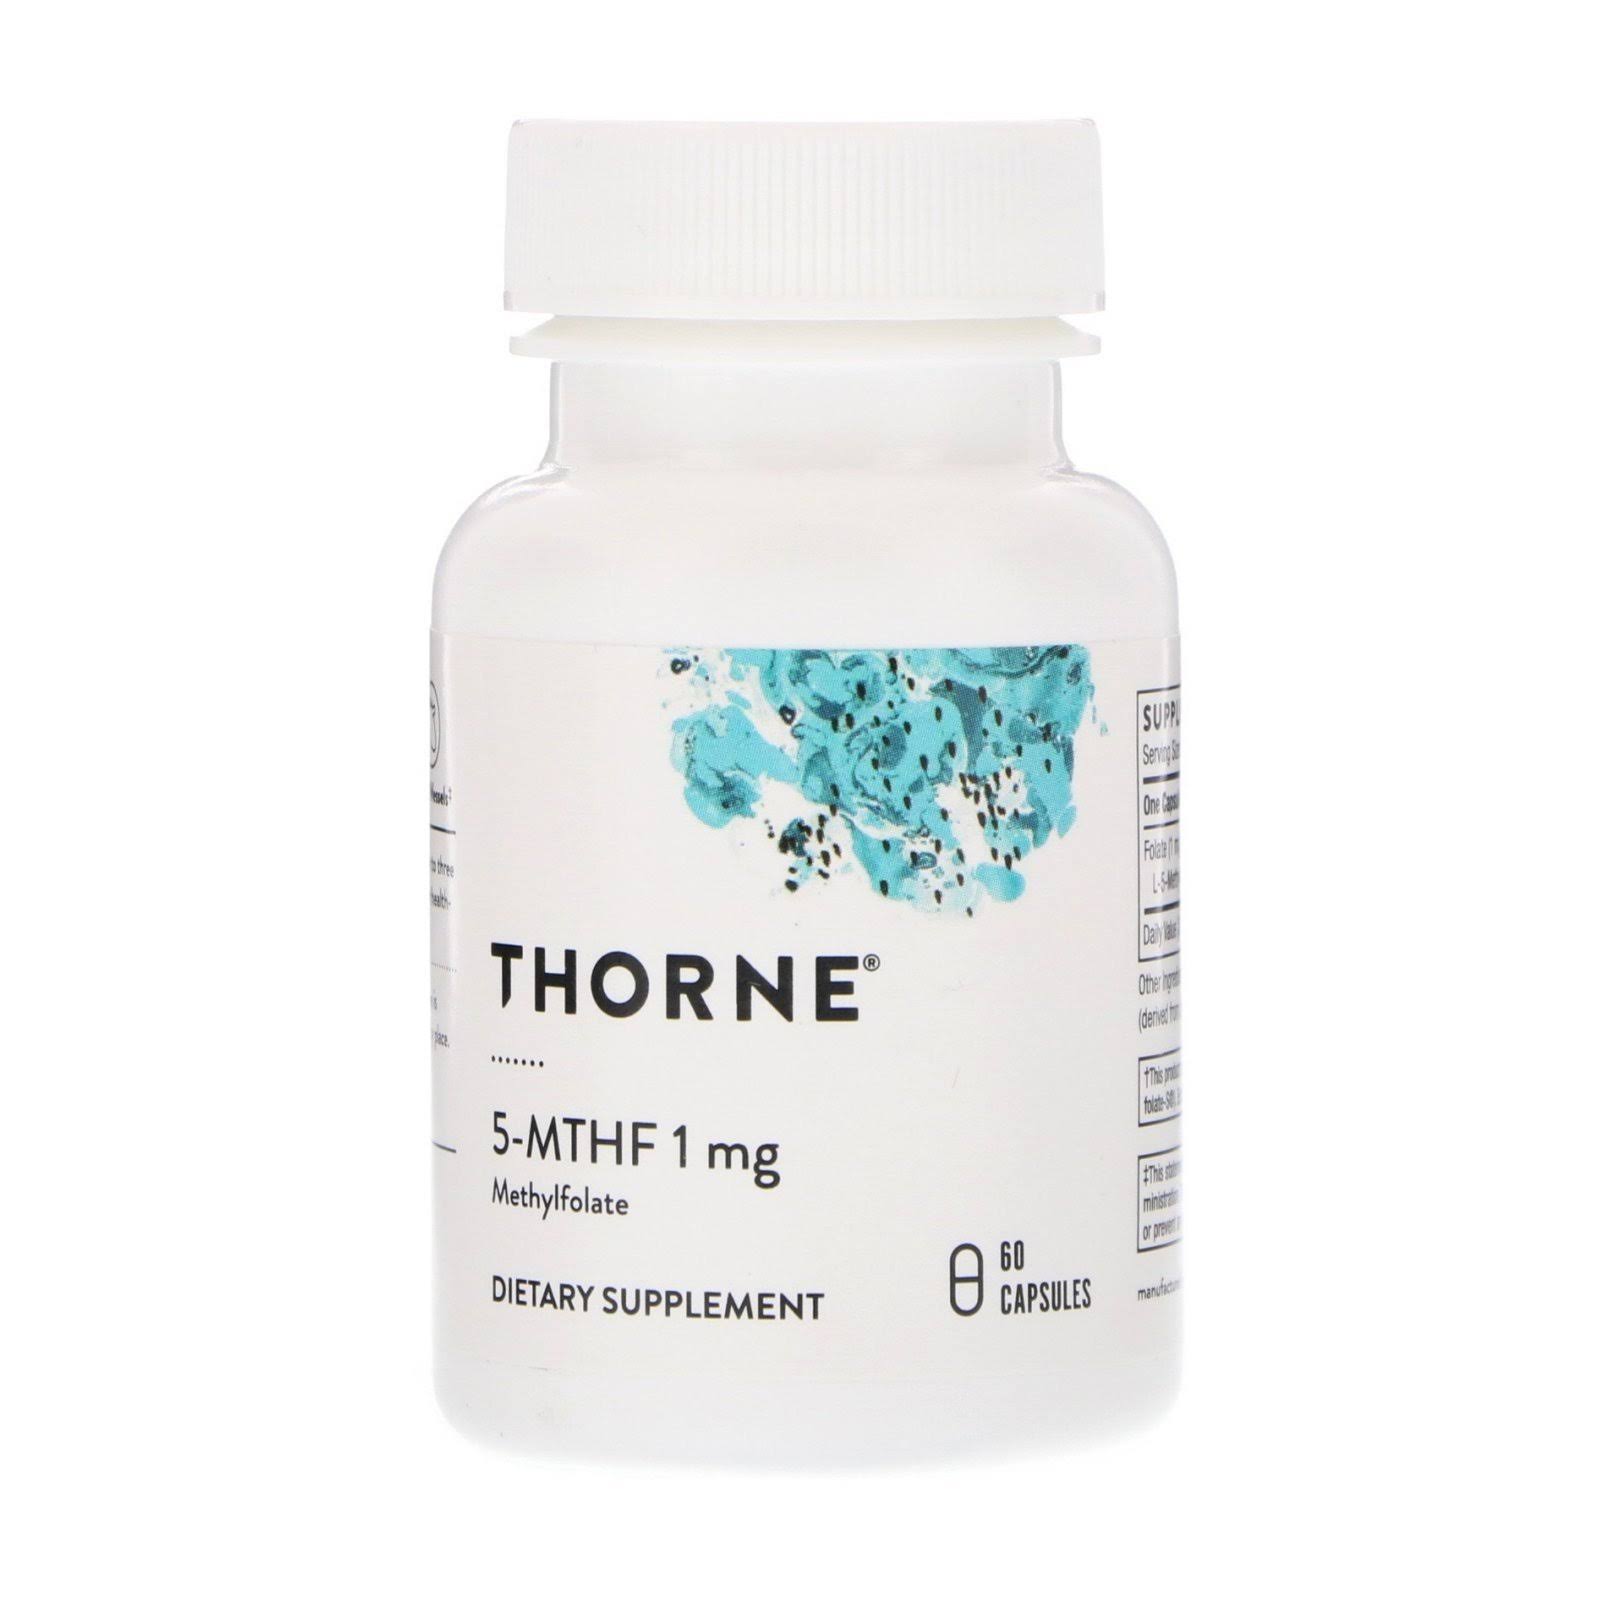 Thorne Research 5-MTHF Vegetarian Dietary Supplement - 1mg, 60 Capsules